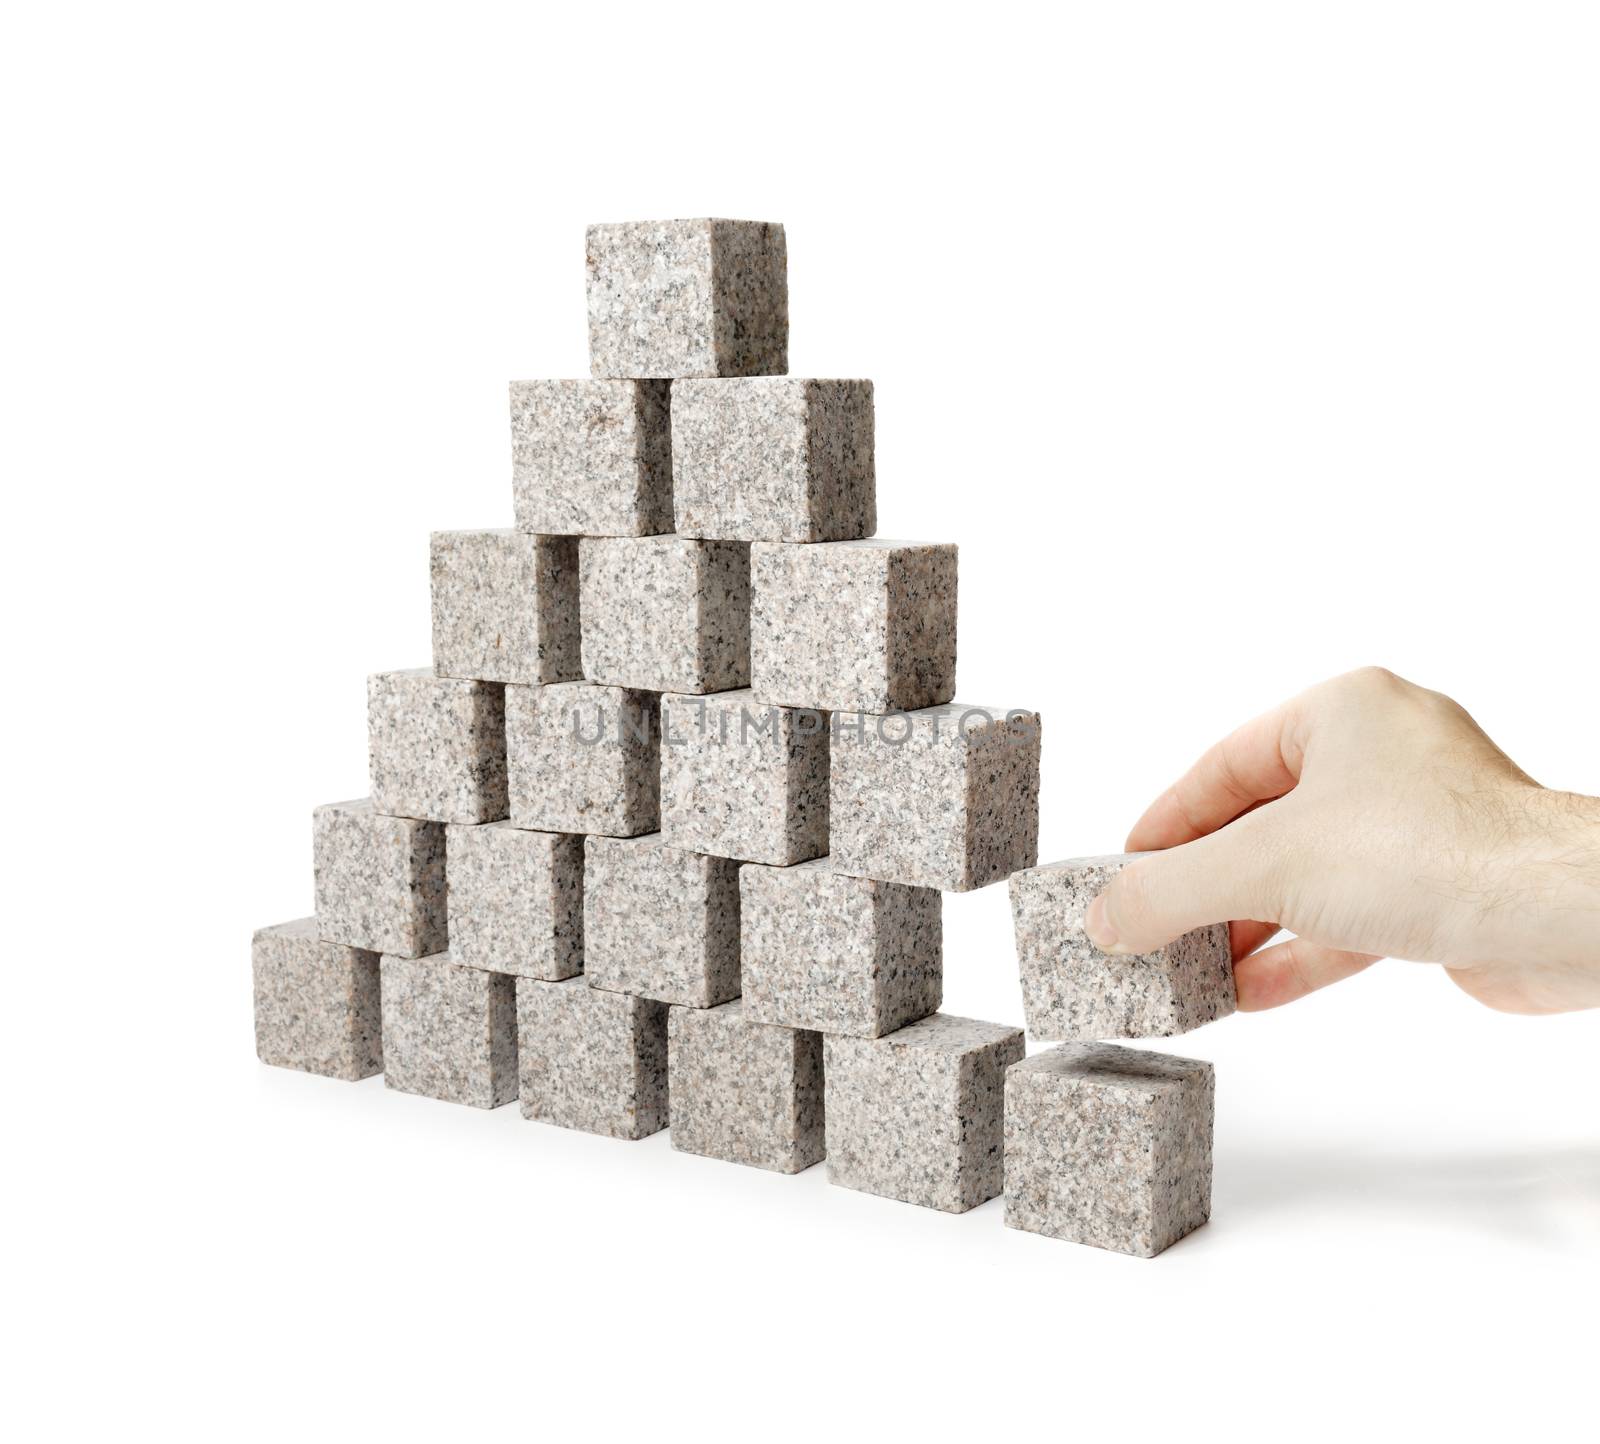 Hand removing one block of a pyramid made of small granite rock blocks.